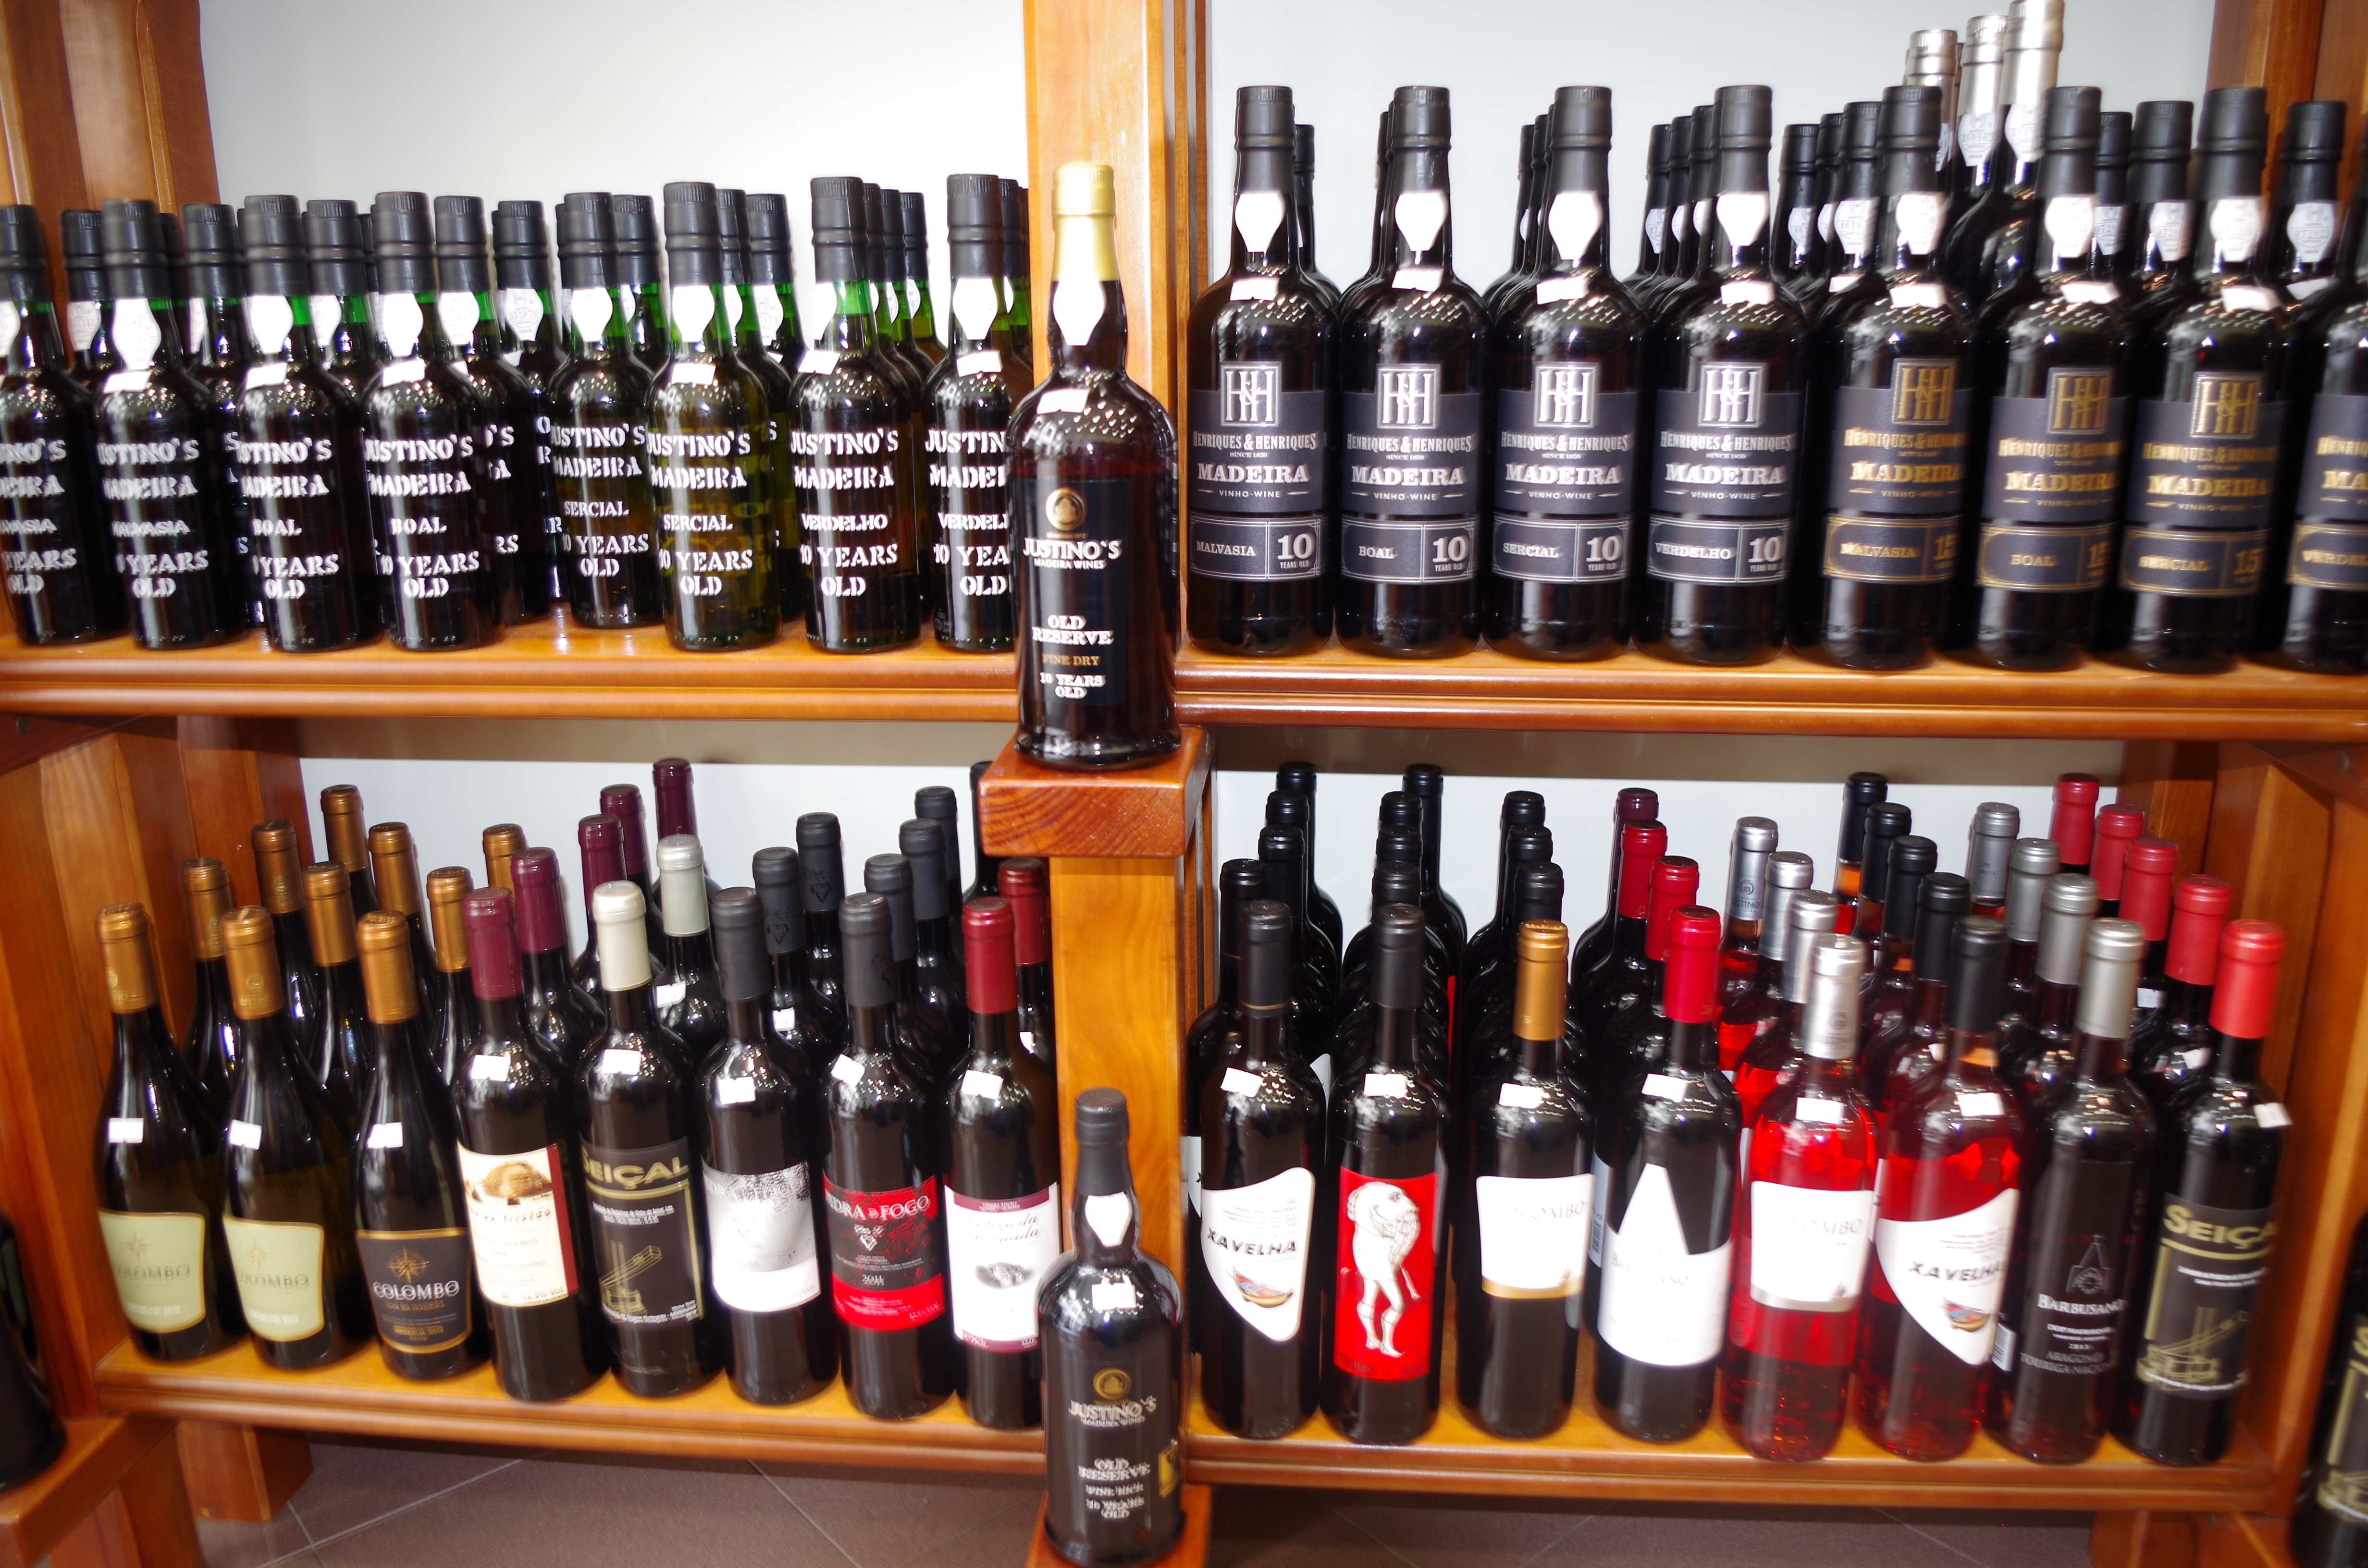 Madeira wines and table wines